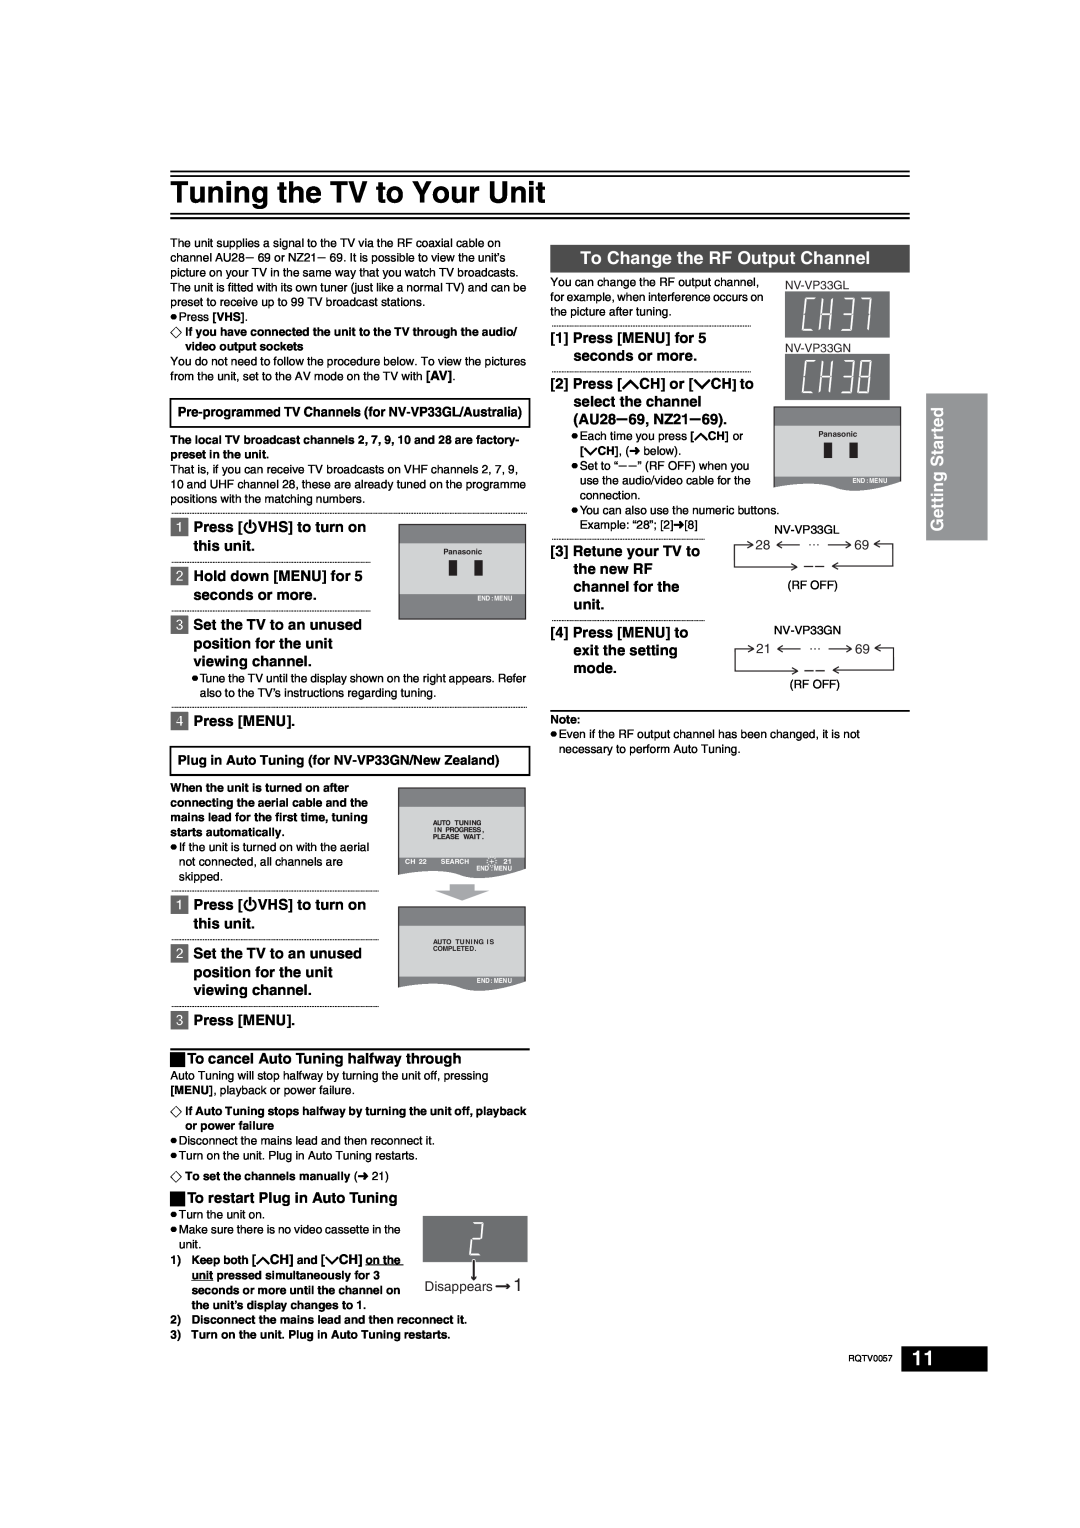 Panasonic NV-VP33 Series Tuning the TV to Your Unit, To Change the RF Output Channel, Getting Started, Press MENU for 